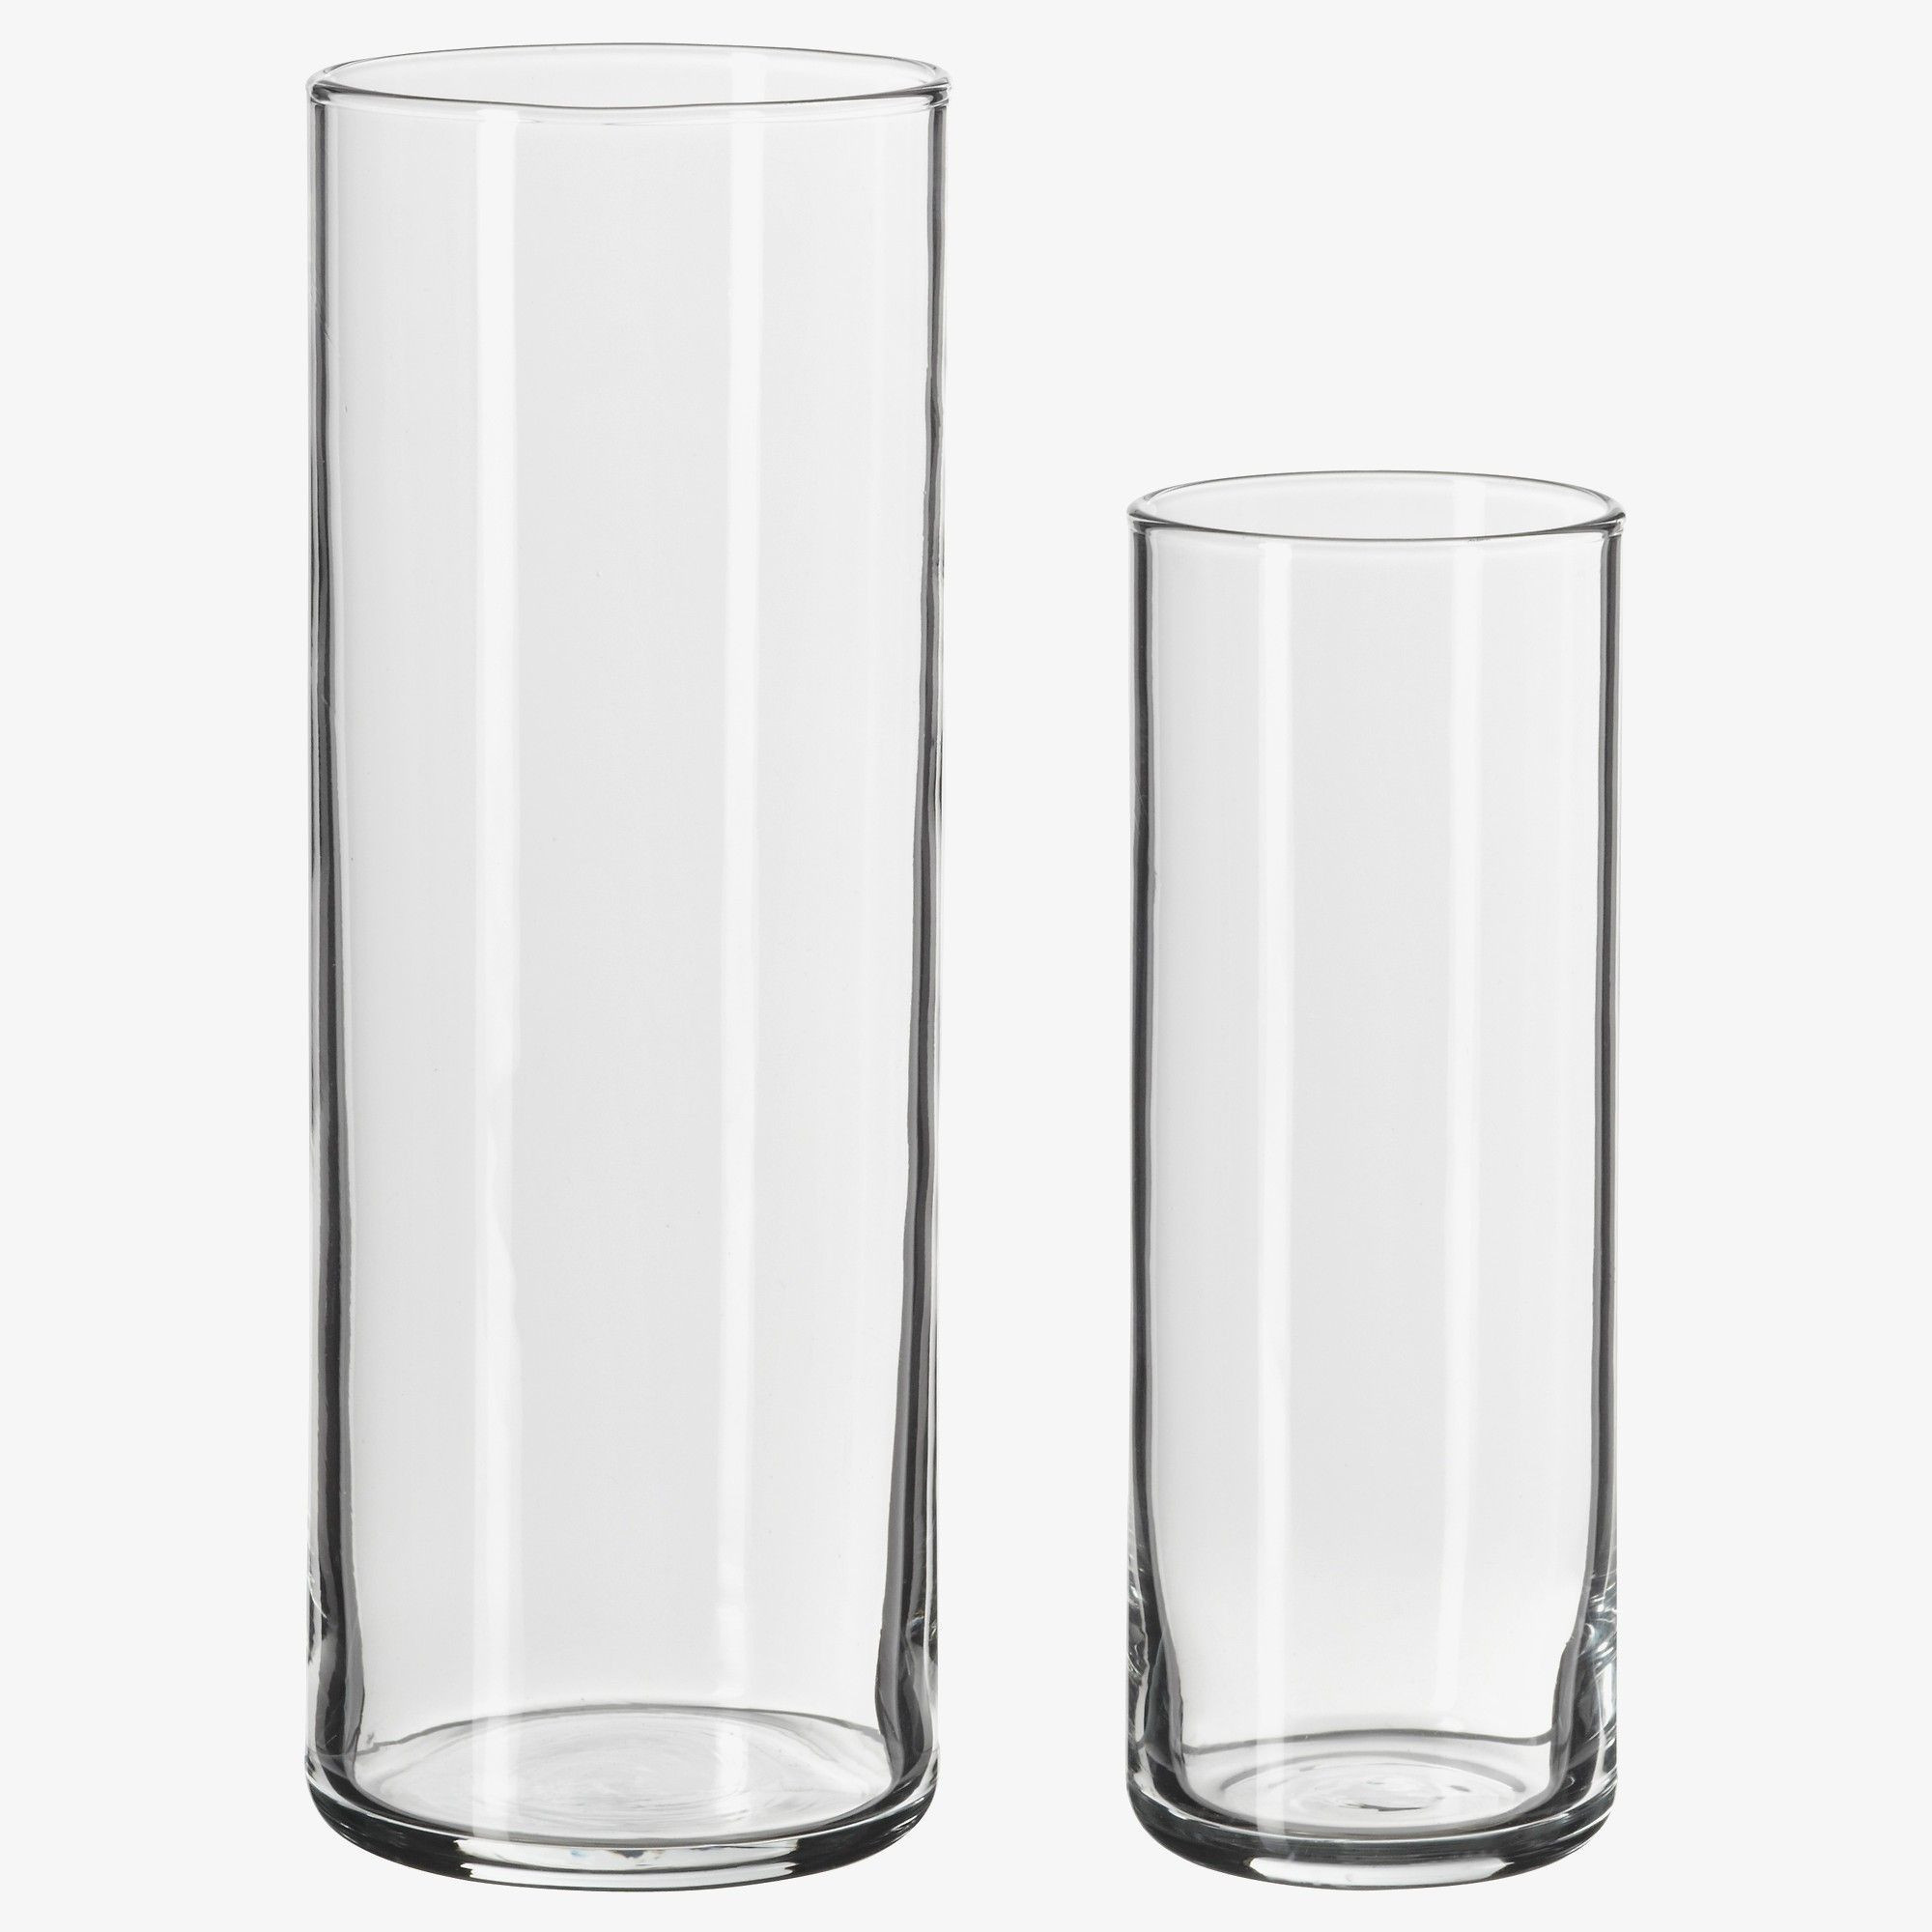 27 Unique Hurricane Vases In Bulk 2024 free download hurricane vases in bulk of 40 glass vases bulk the weekly world intended for clear glass tv stand charming new design ikea mantel great pe s5h